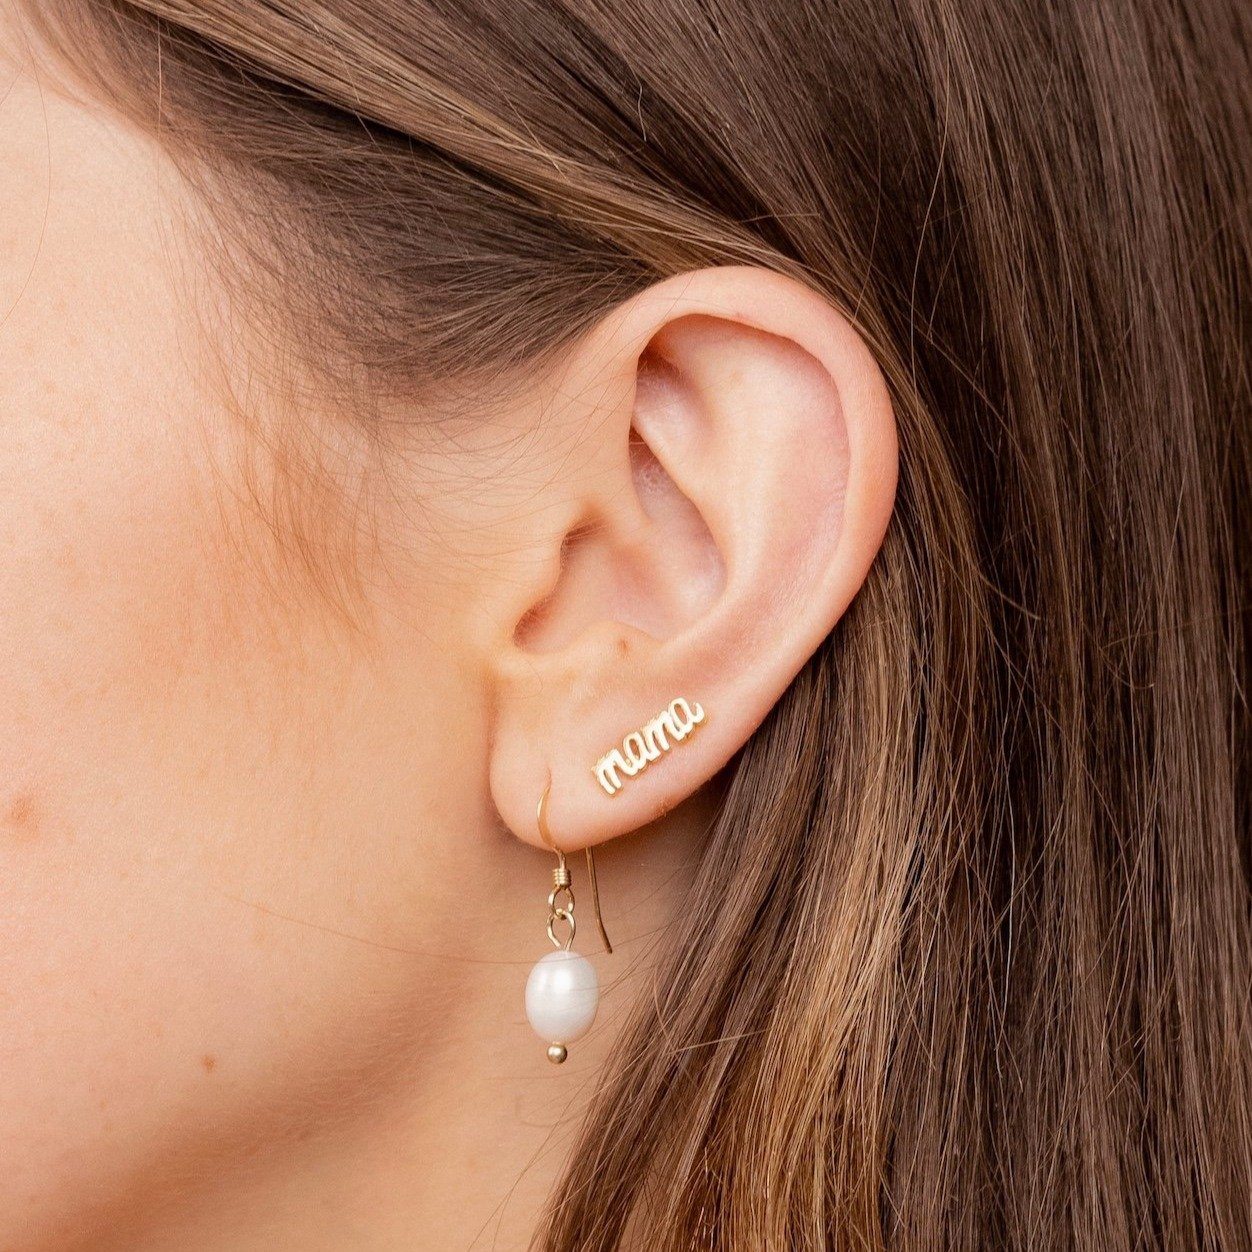 Dainty gold Pearl Drop Dangly Earrings, Mama Studs, Pearl collection handmade in America made by Katie Dean Jewelry